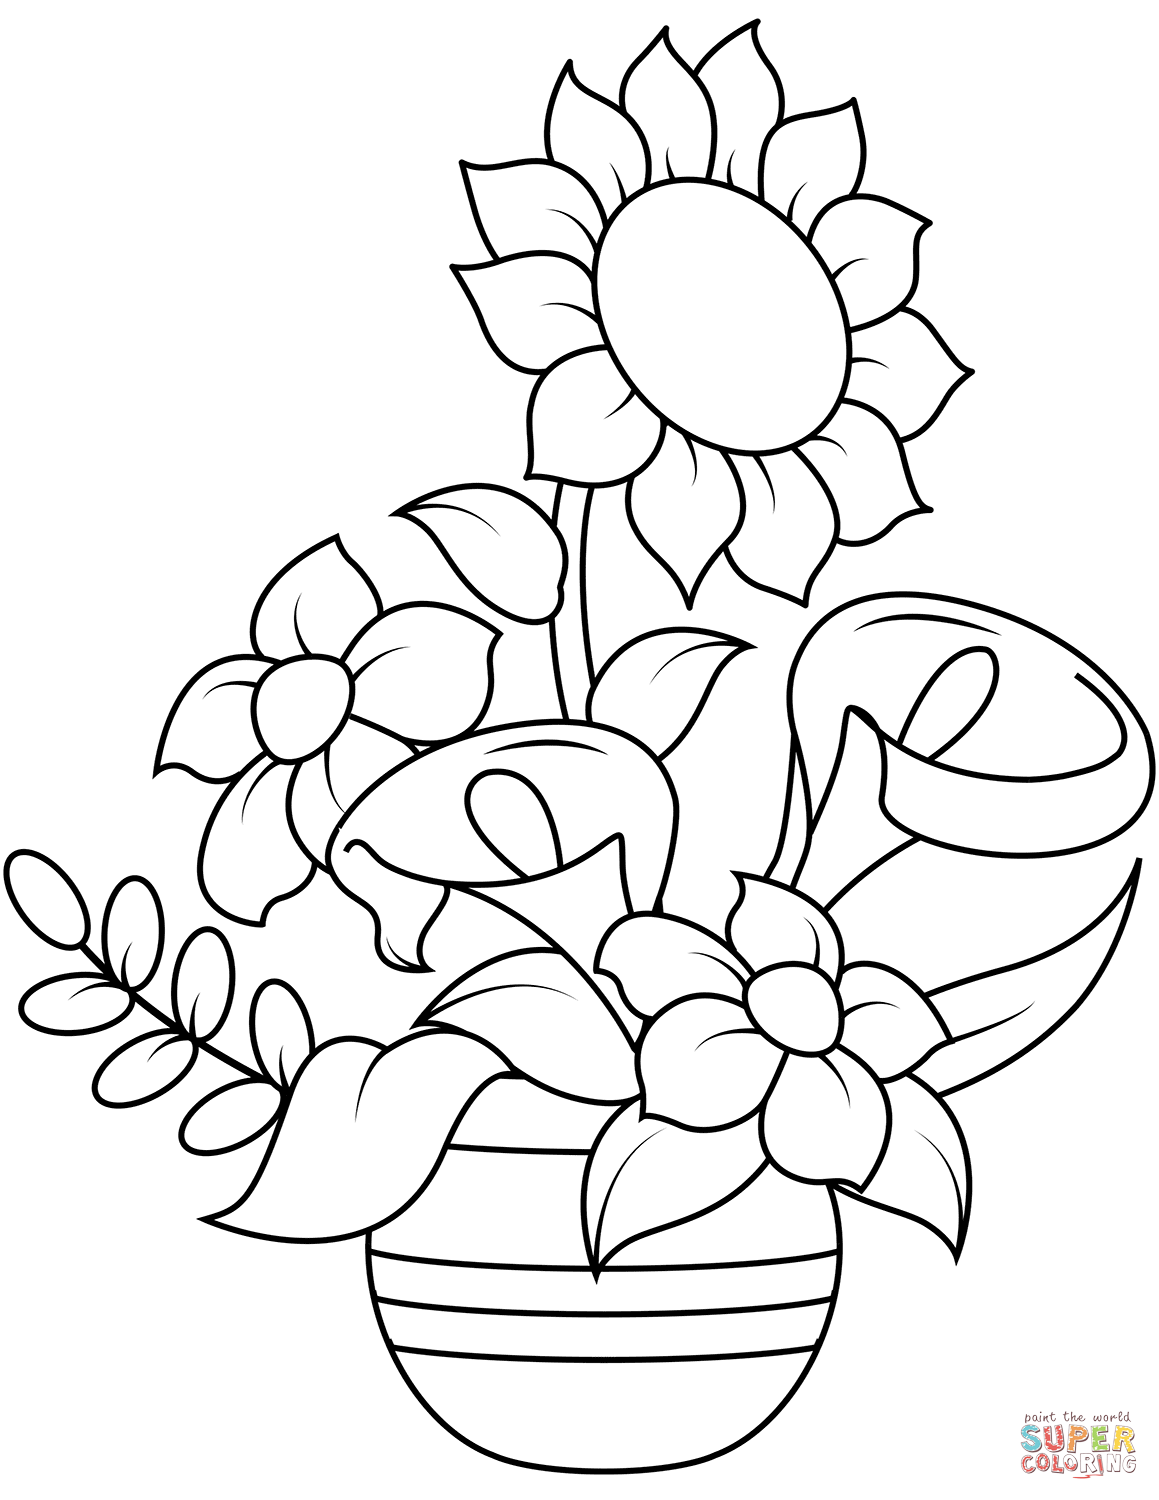 Sunflower And Callas Coloring Pages